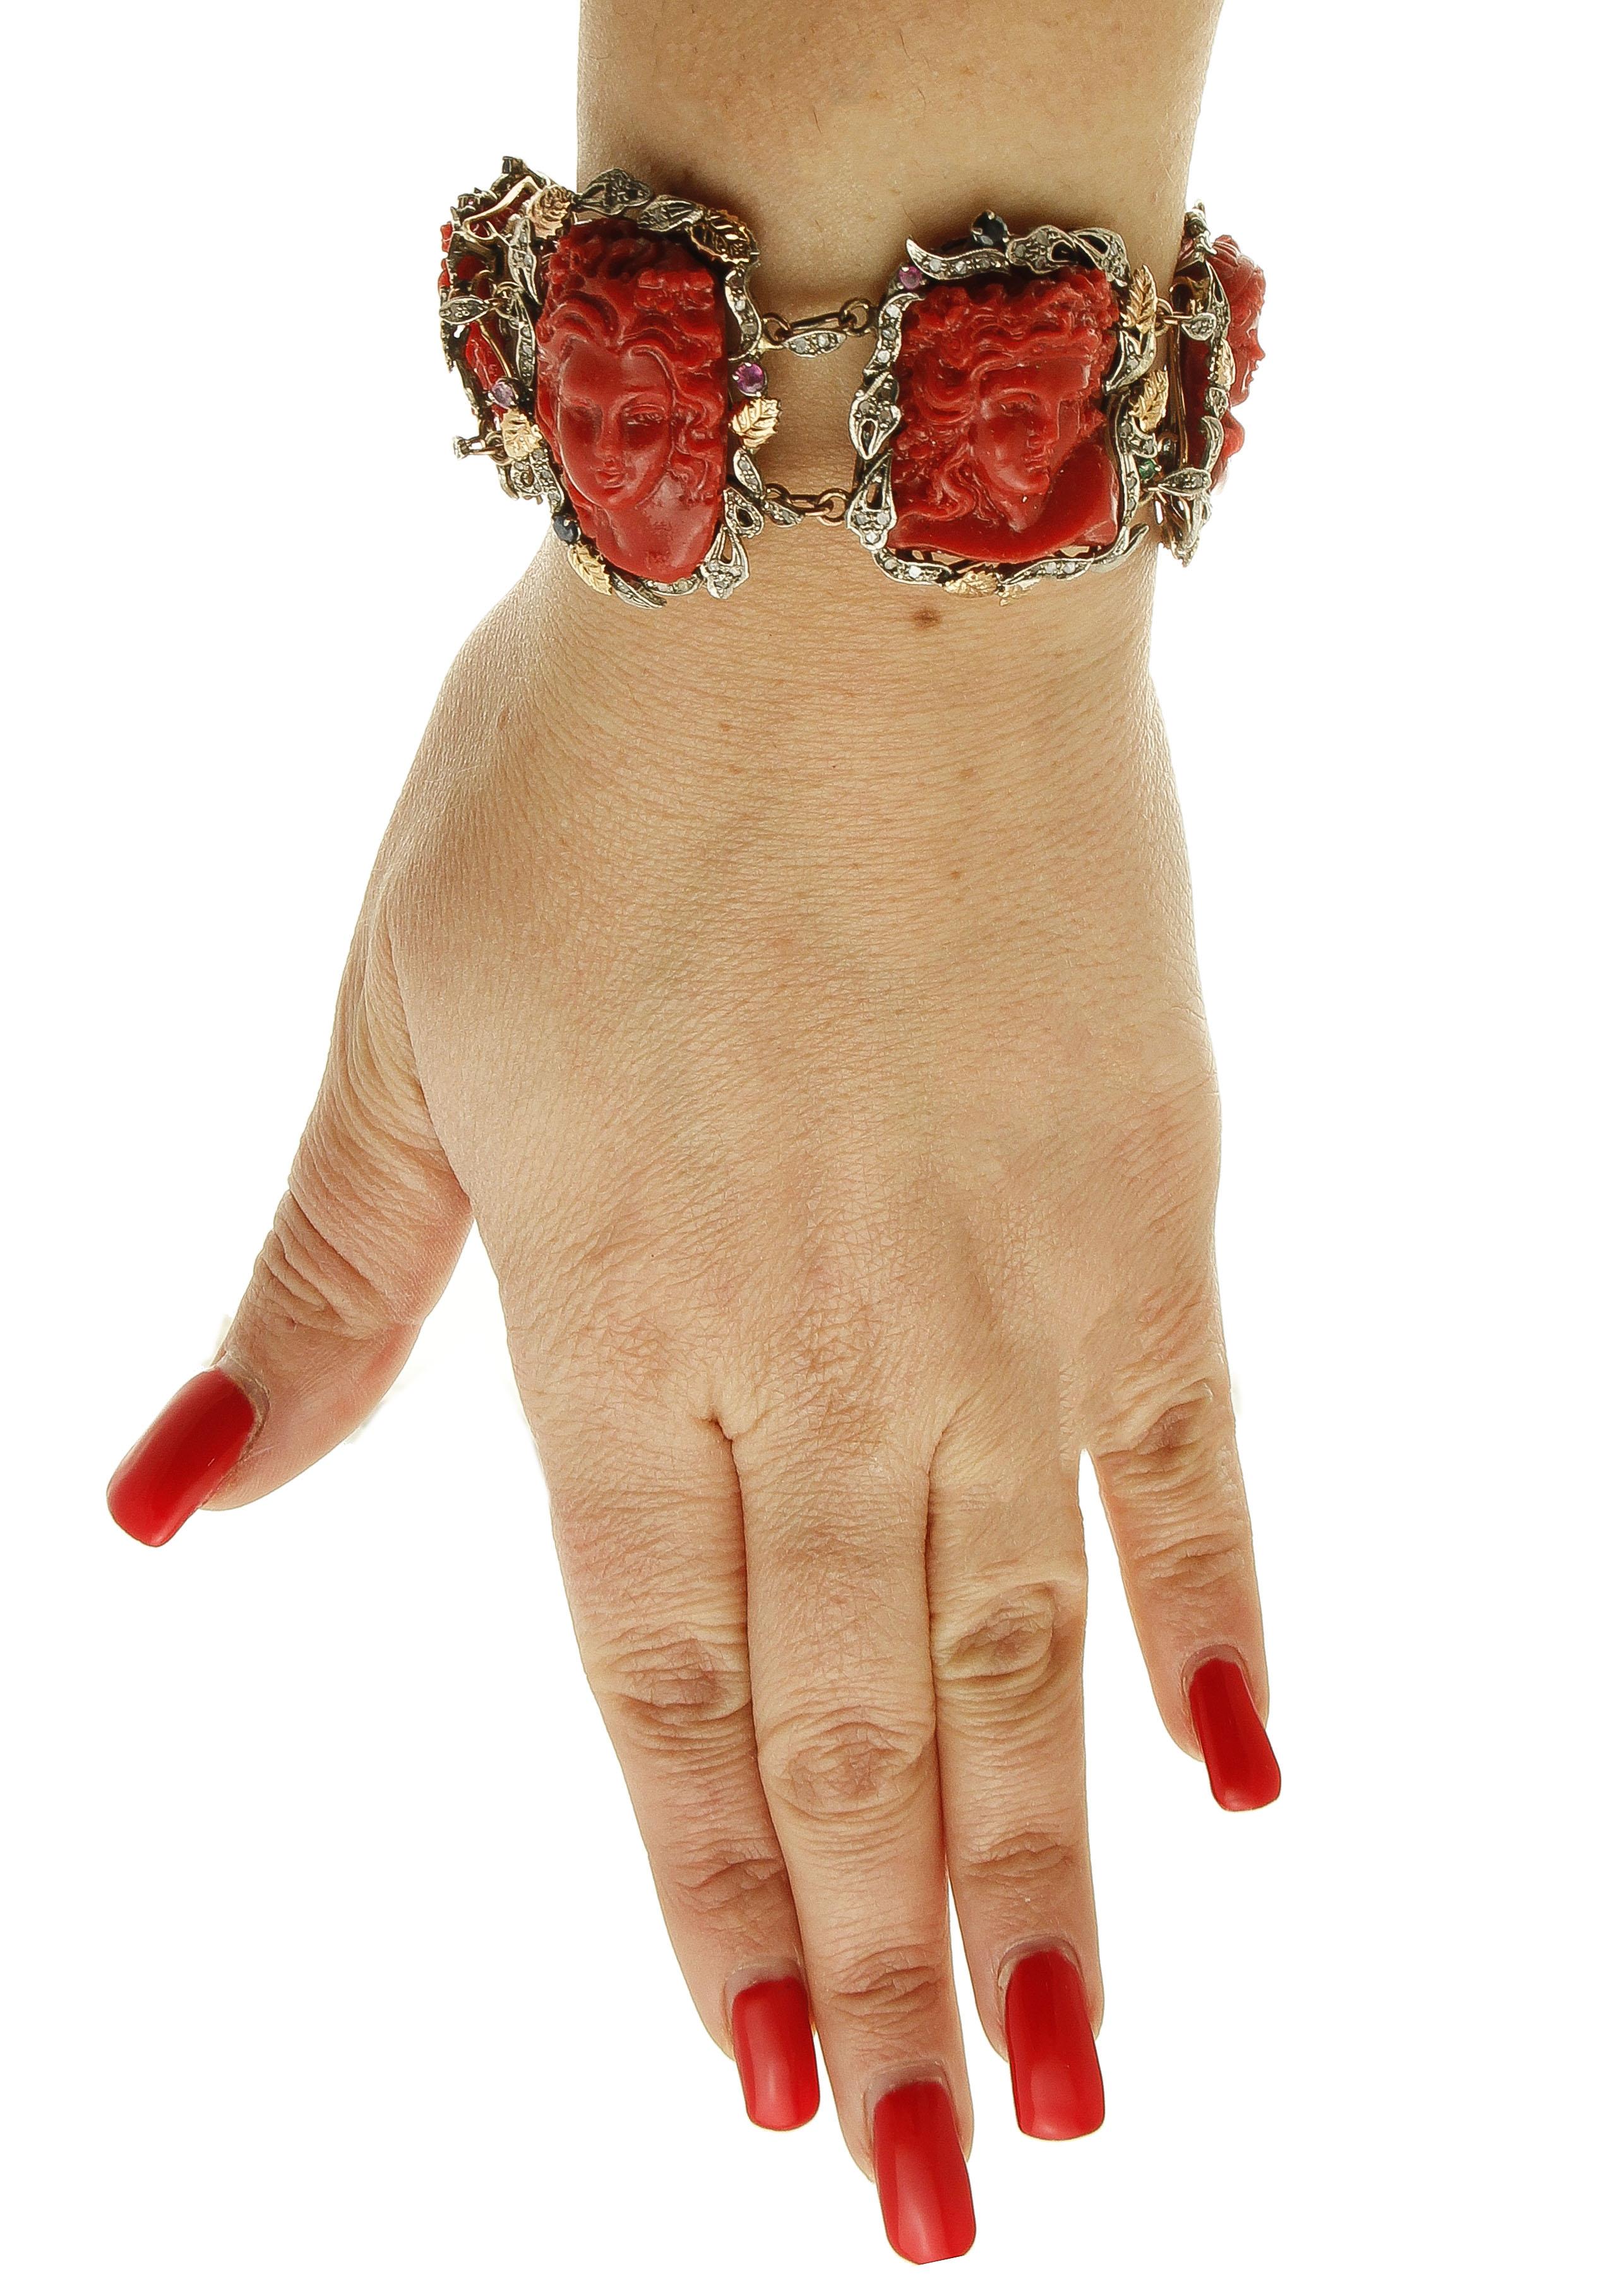 Rose Cut Engraved Faces on Red Coral, Diamonds, Rubies, Sapphires, Gold/Silver  Bracelet For Sale